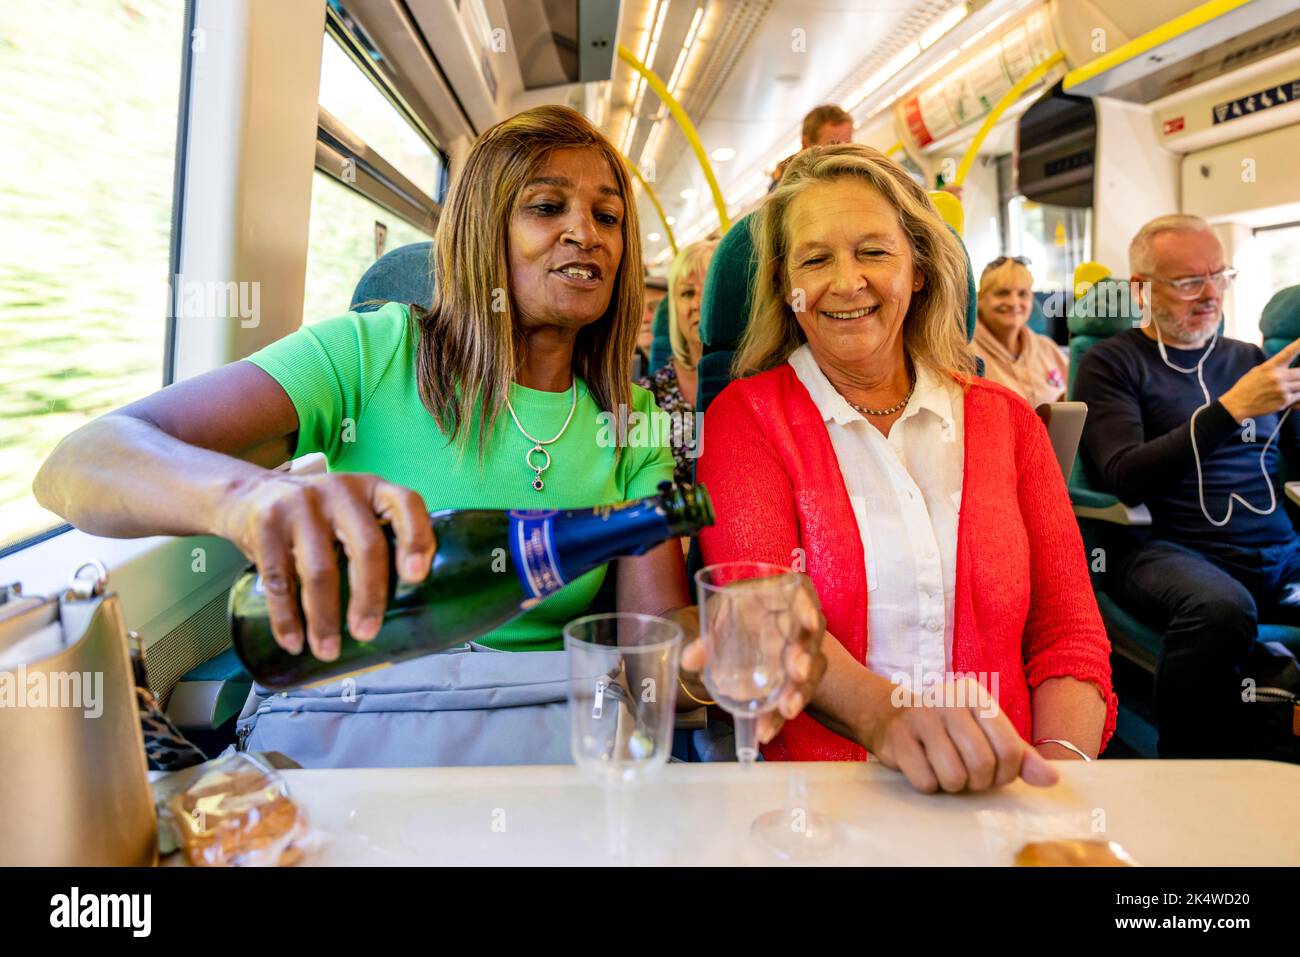 Two Mature Women Enjoy A Glass Of Prosecco On The Train, Sussex, UK. Stock Photo